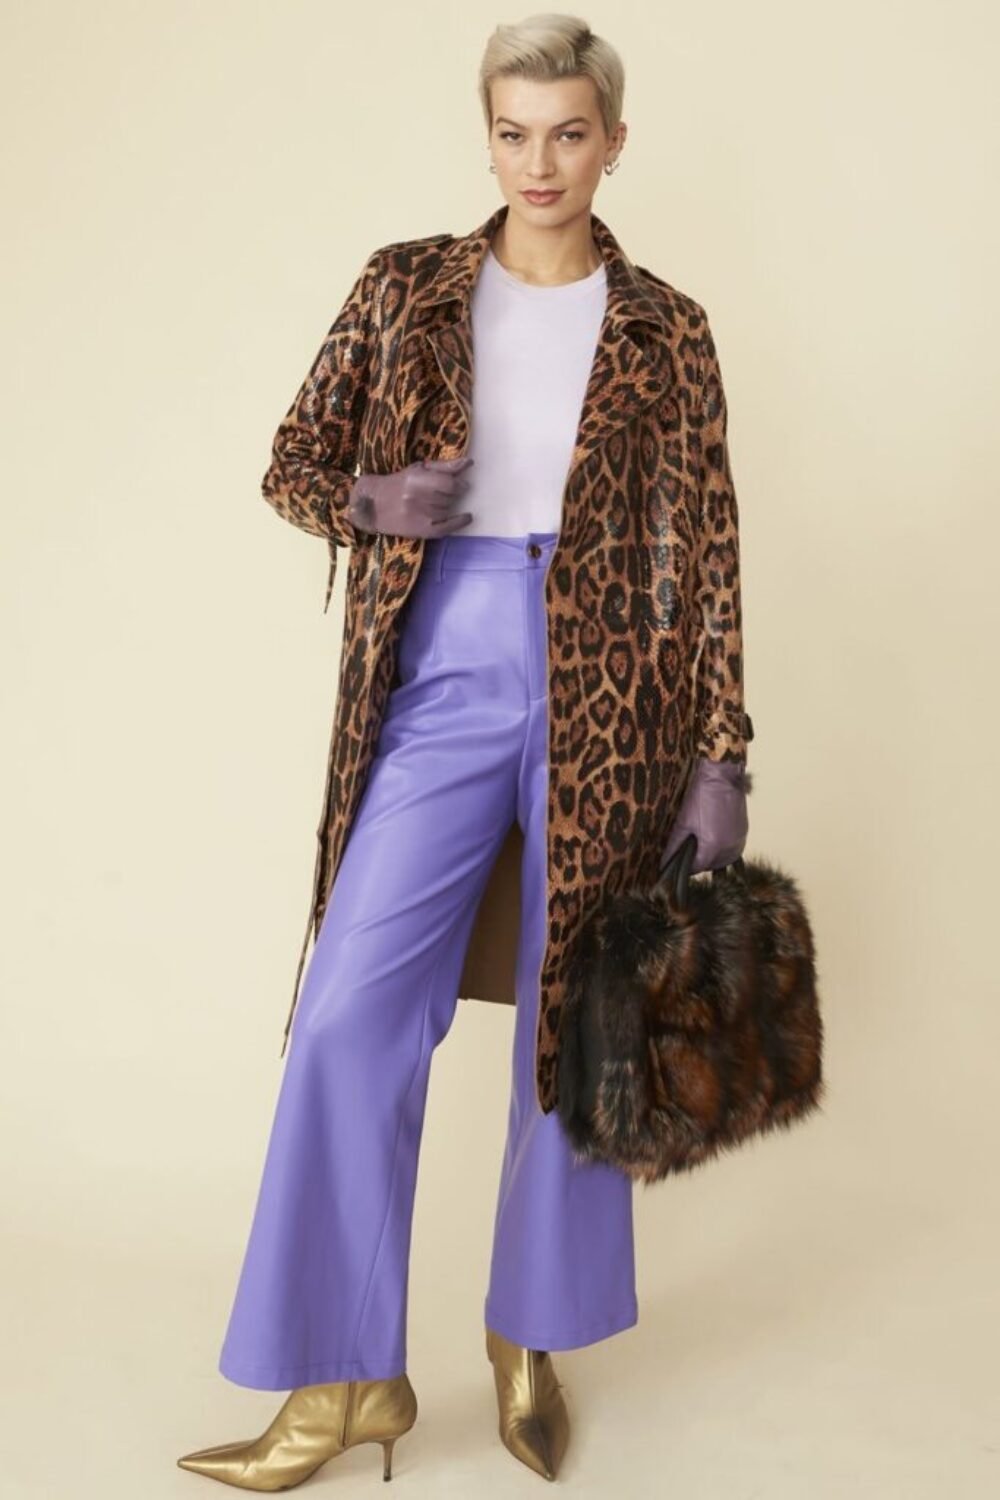 Shop Lux Mocha Leopard Print Snake Effect Trench Coat and women's luxury and designer clothes at www.lux-apparel.co.uk